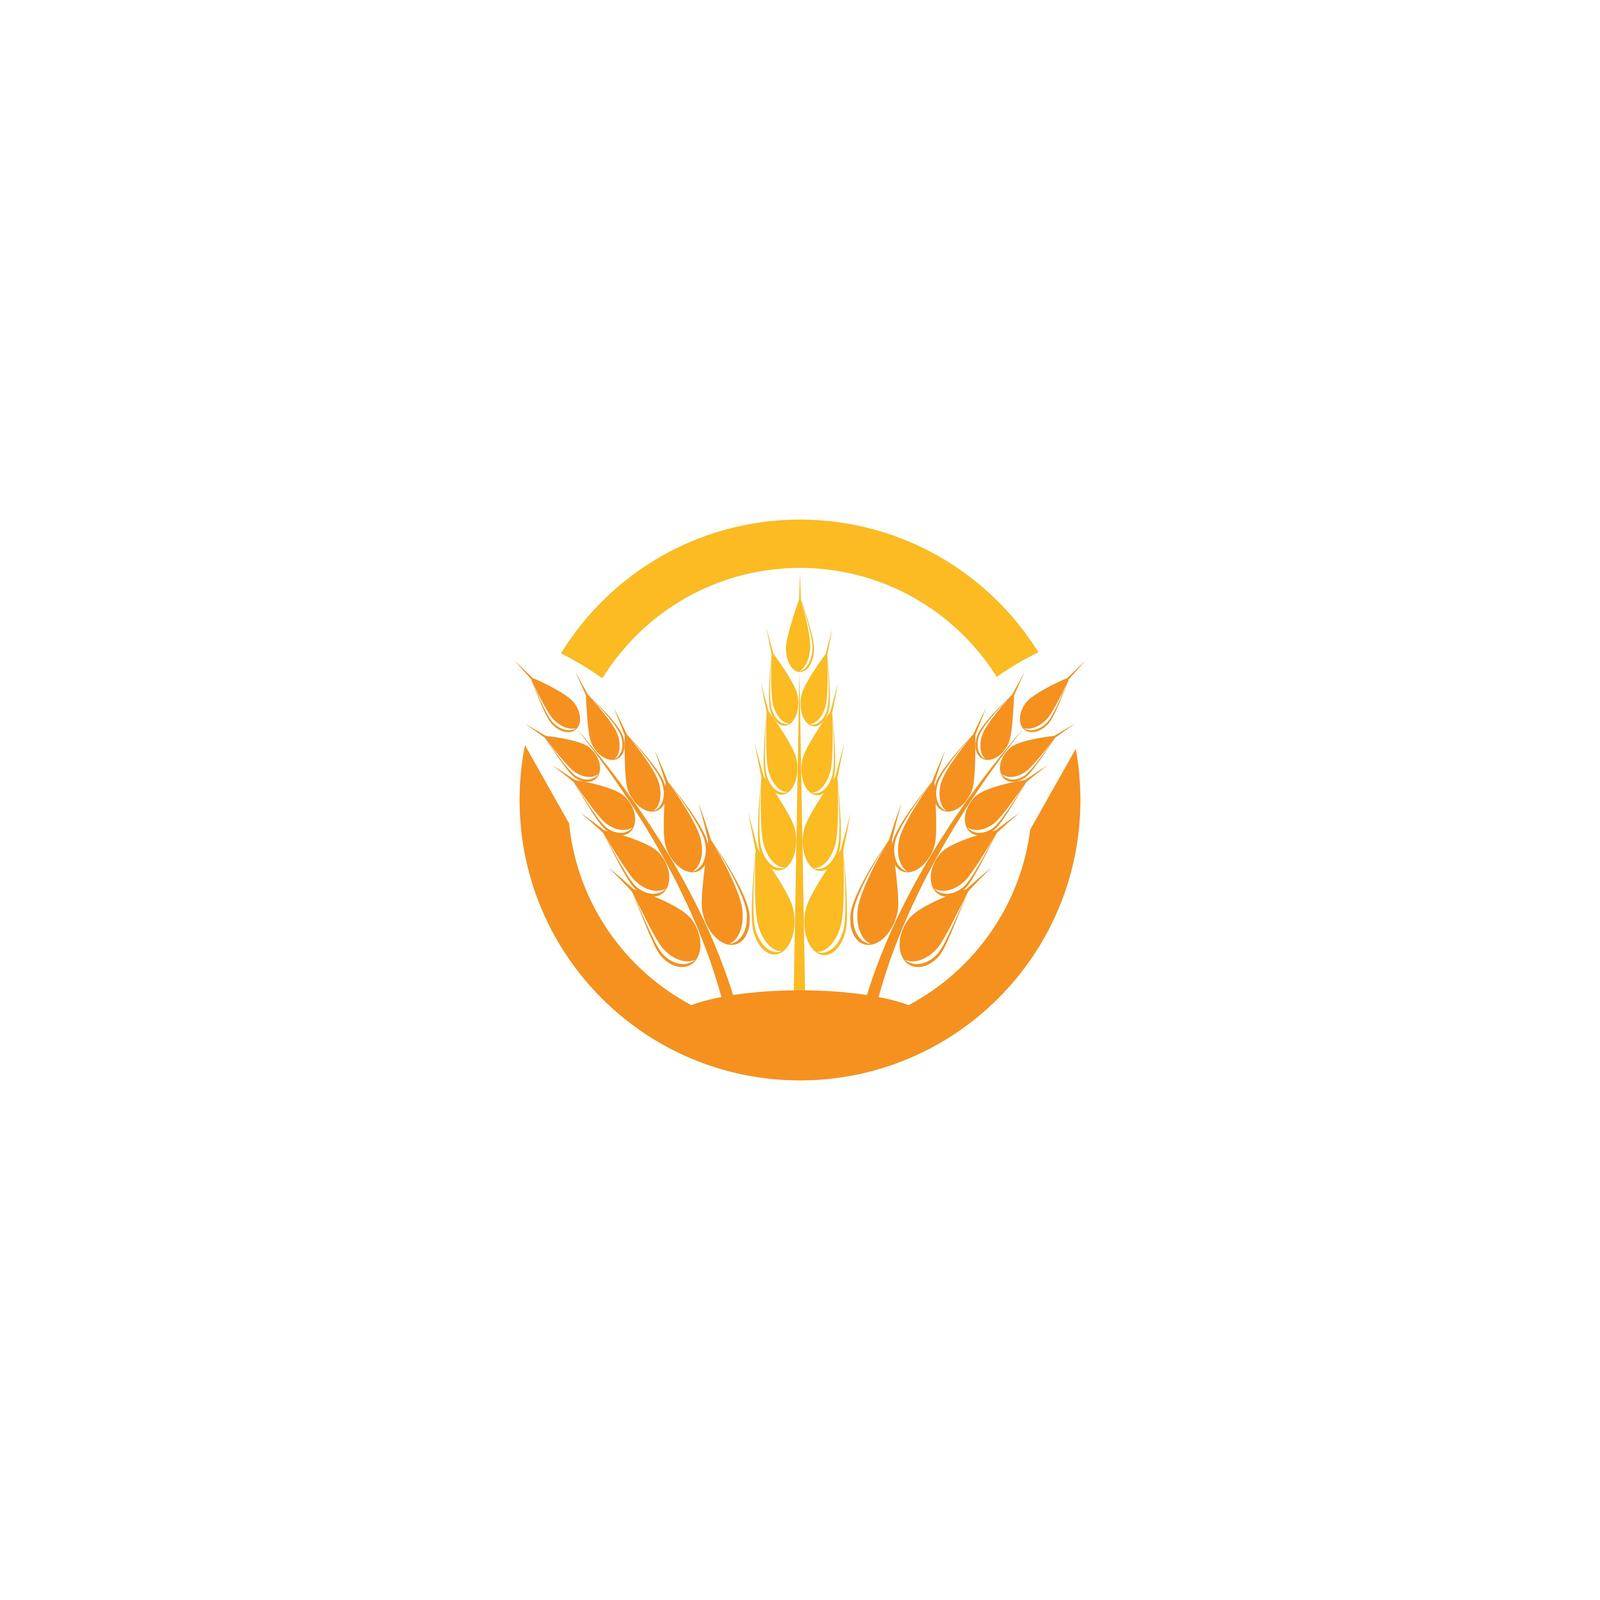 Wheat Logo Template vector symbol by Redgraphic